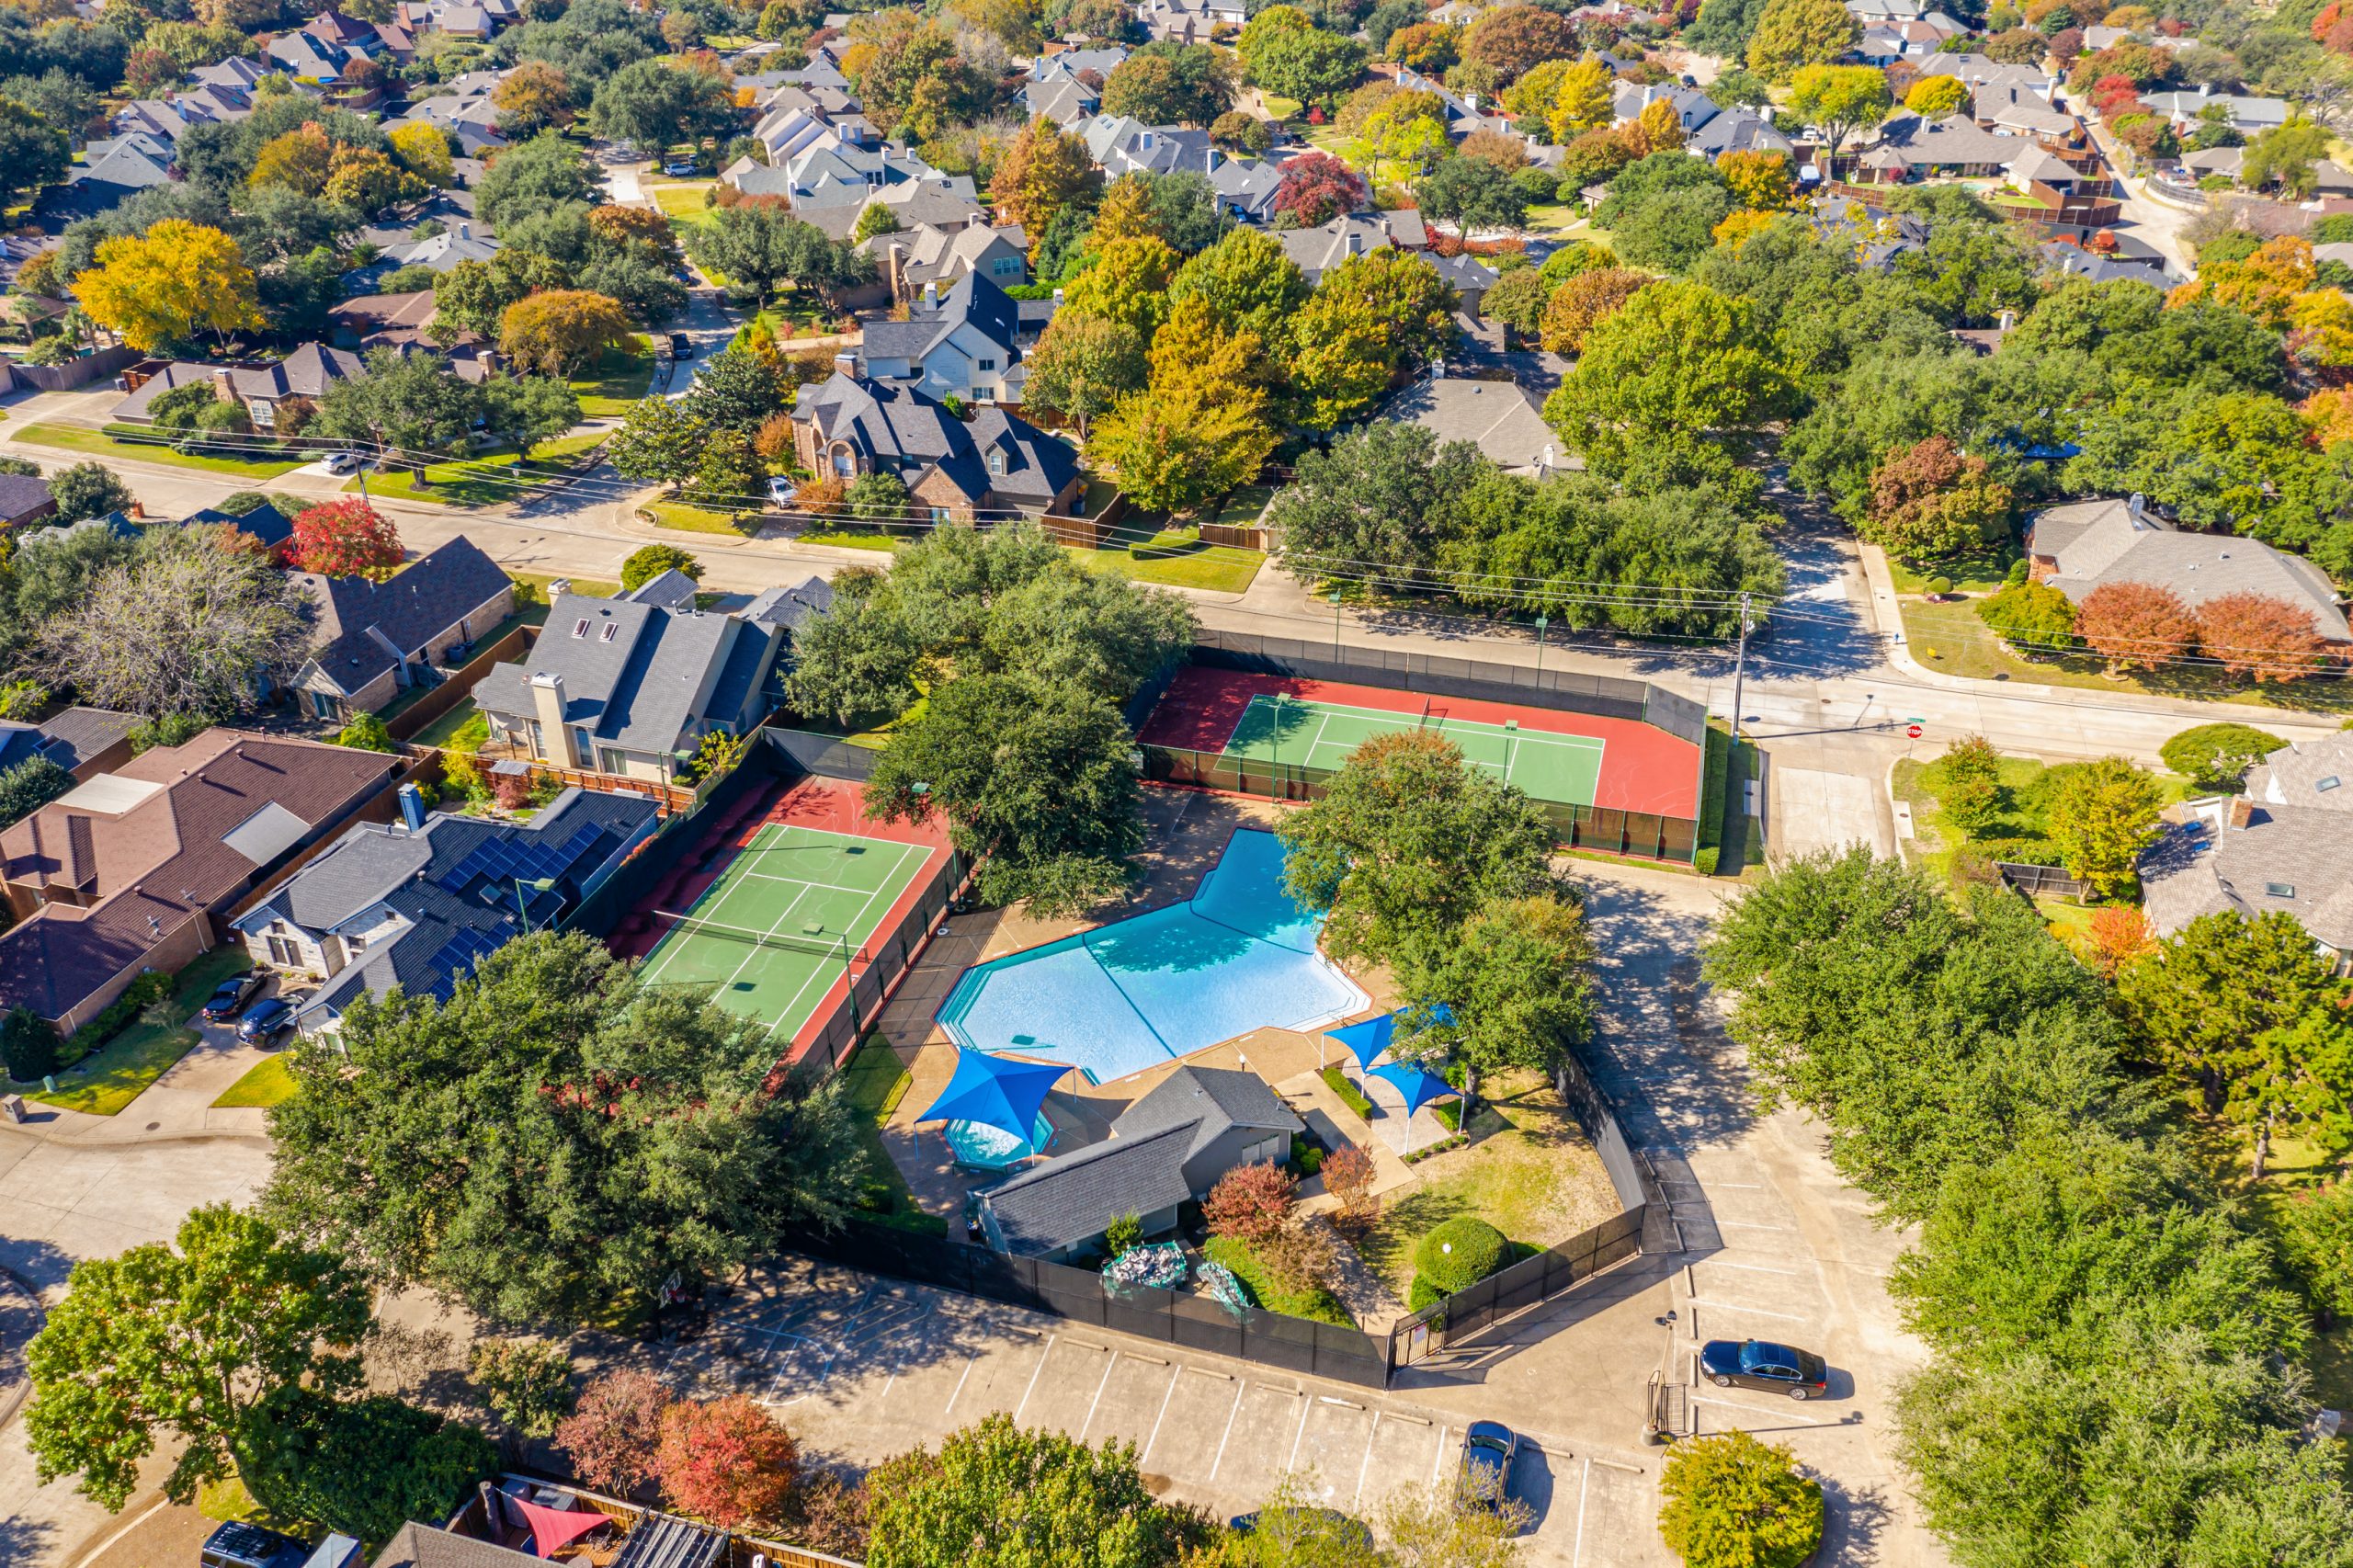 neighborhood pool and tennis courts photographed by drone